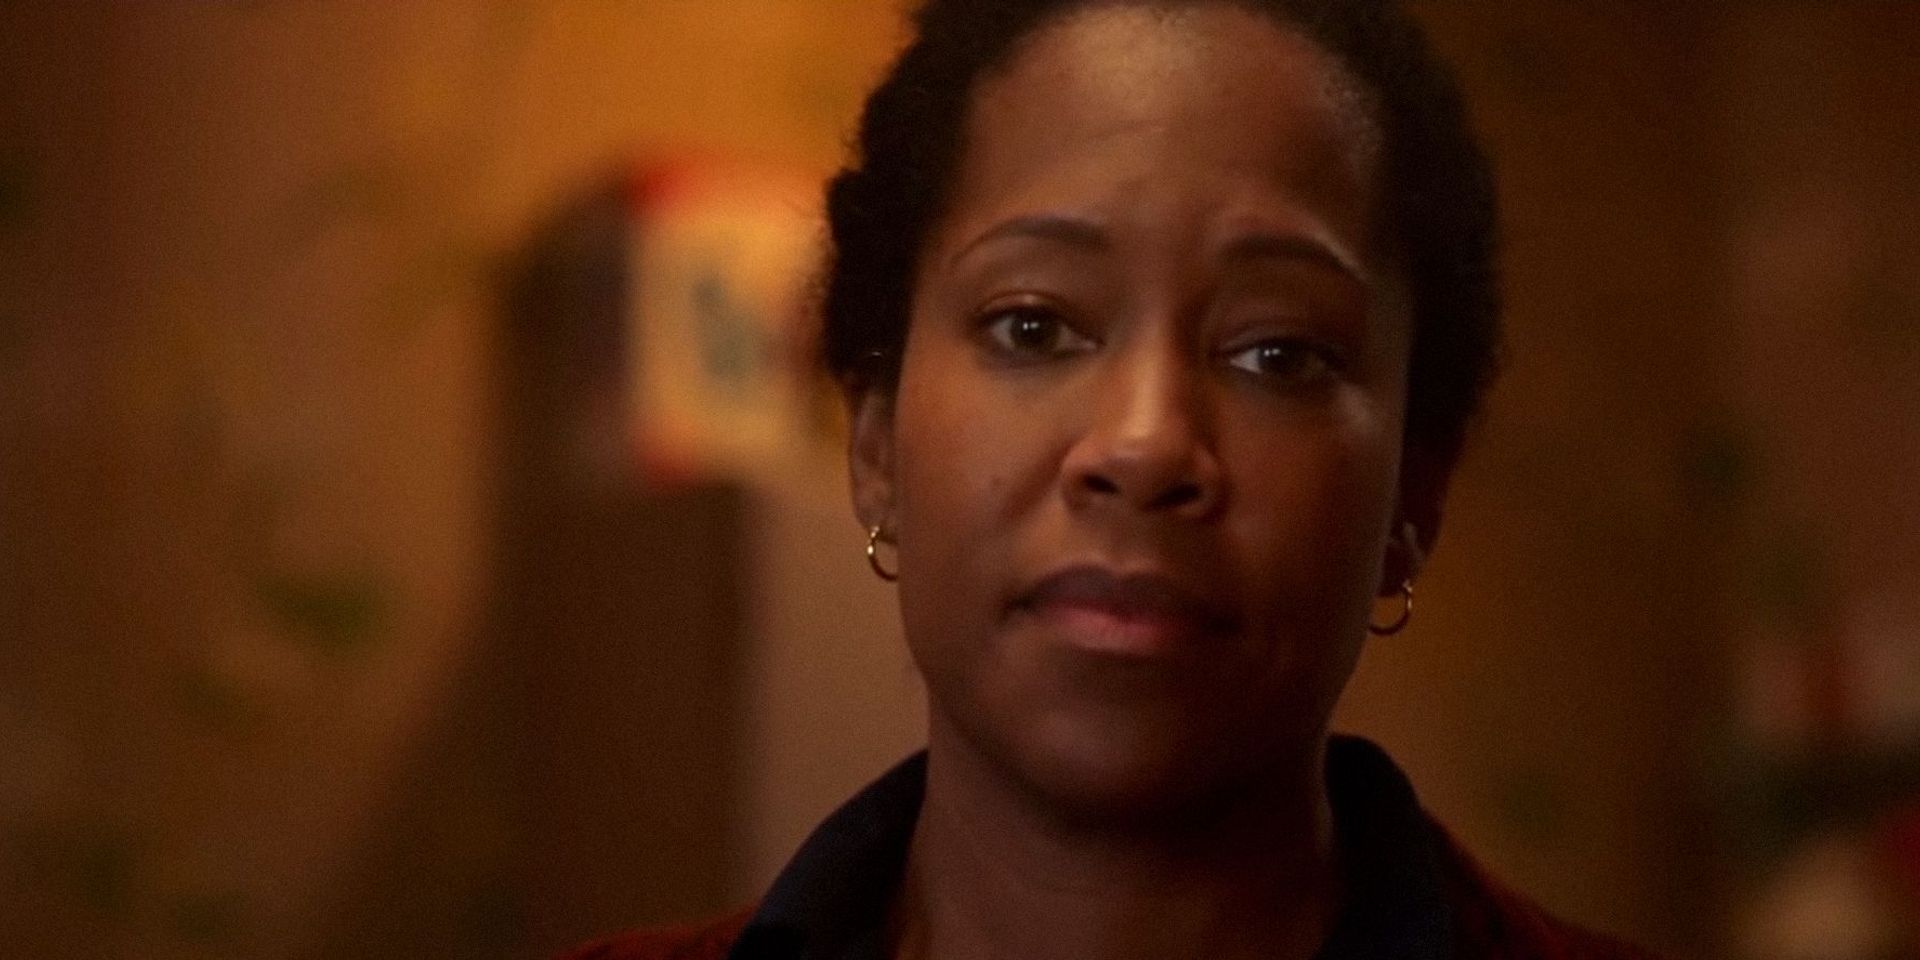 Regina King sadly looks forward in 'If Beale Street Could Talk'